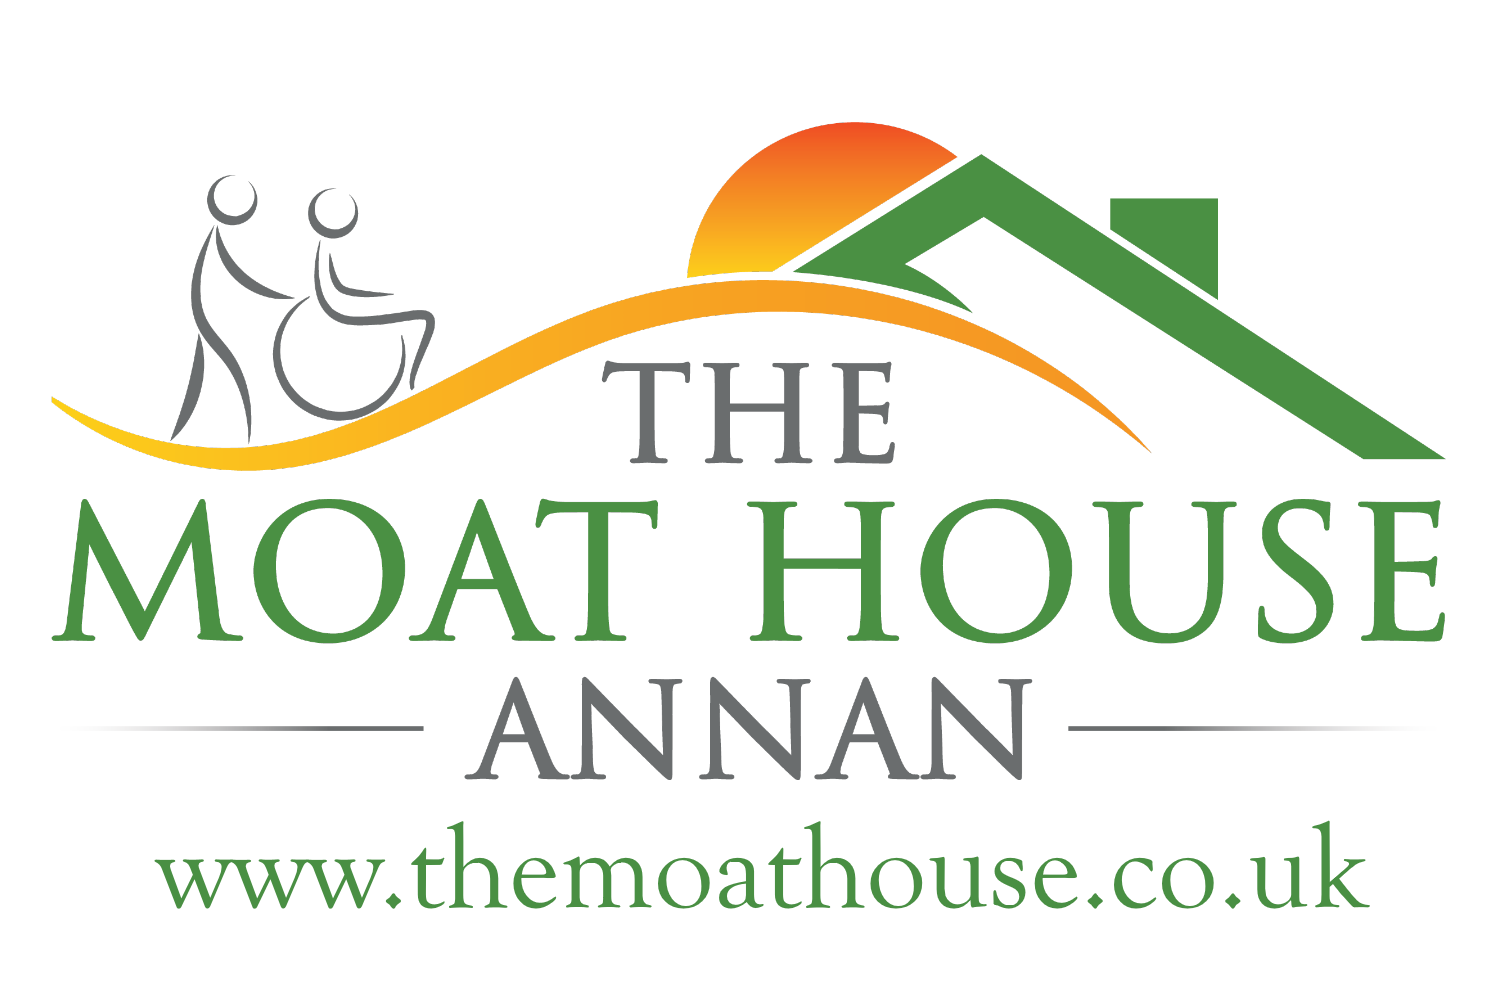 Logo of The Moat House Annan